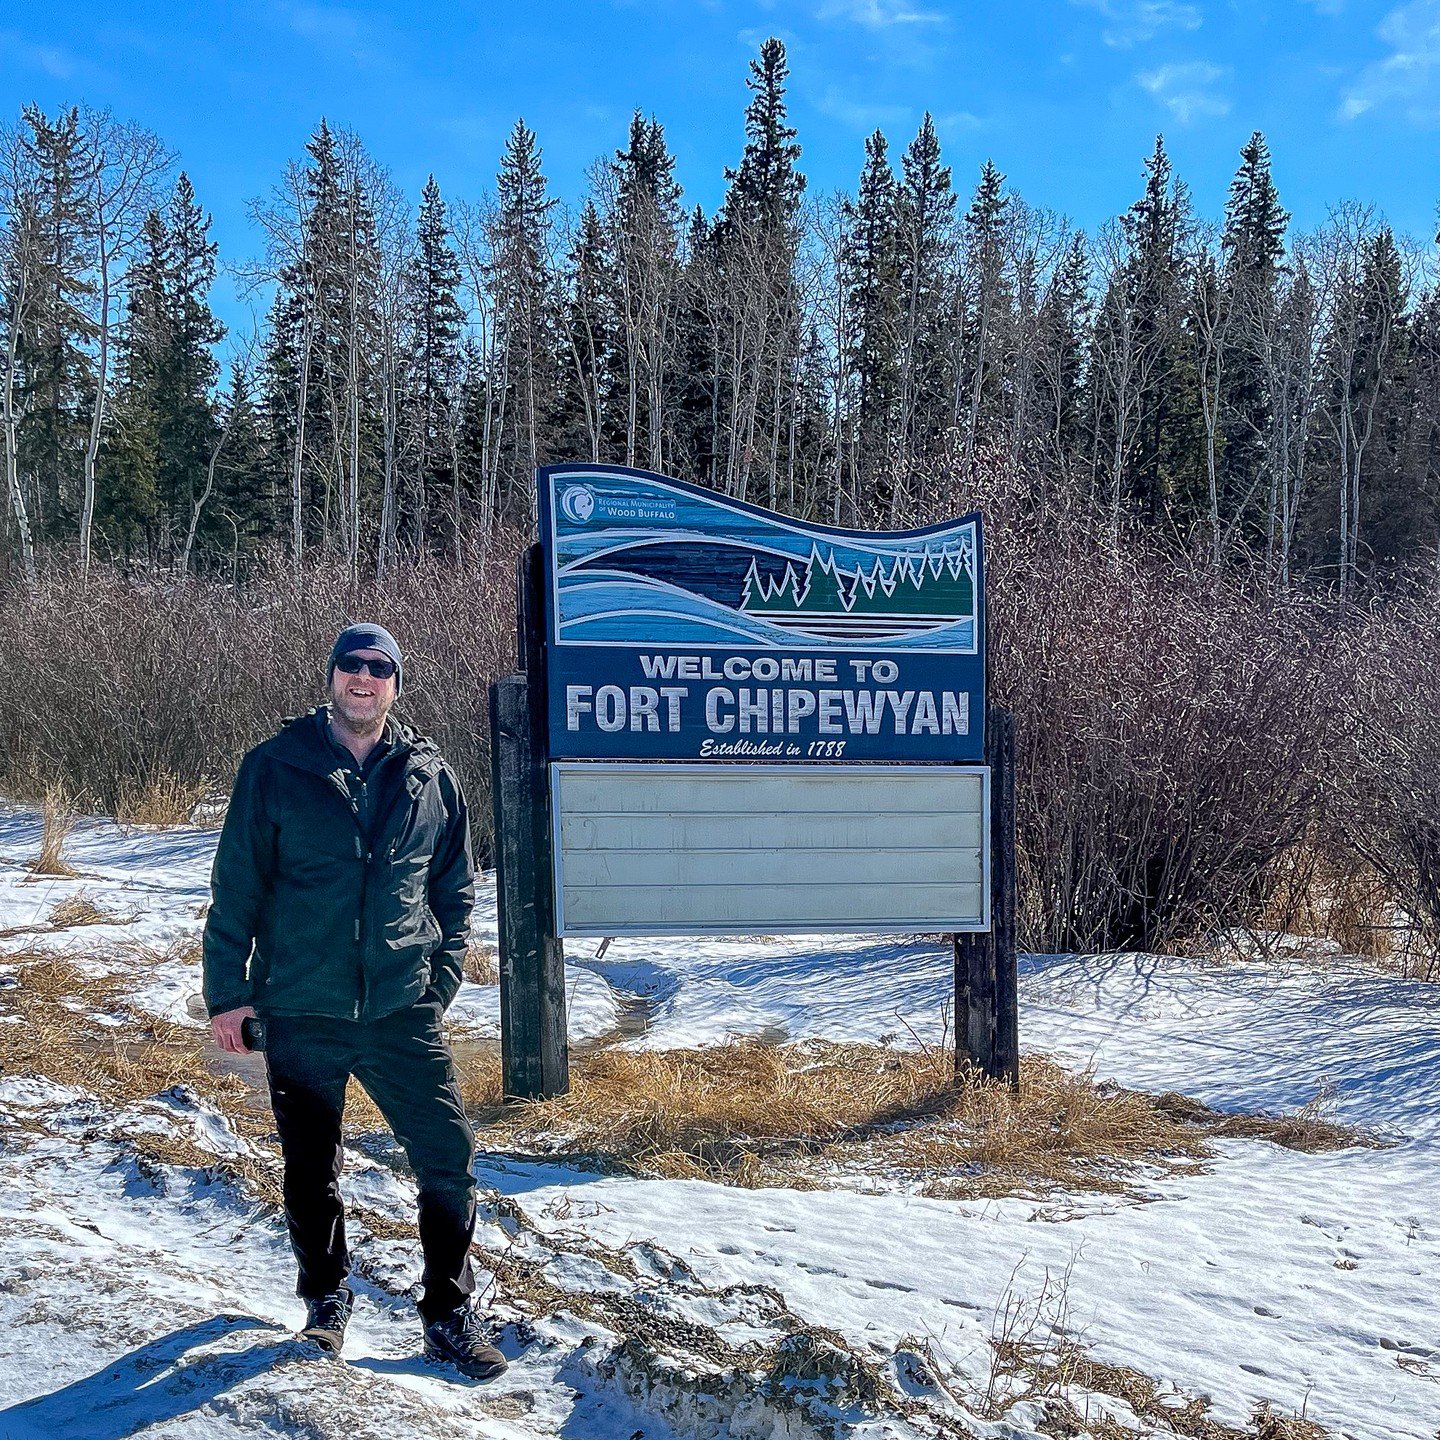 We love it when our work takes us to beautiful, remote areas. Thank you to the #mikisewcreefirstnation for hosting us and giving us a tour of your traditional territory! We're looking forward to additional visits in #fortchipewyan and beyond in the c